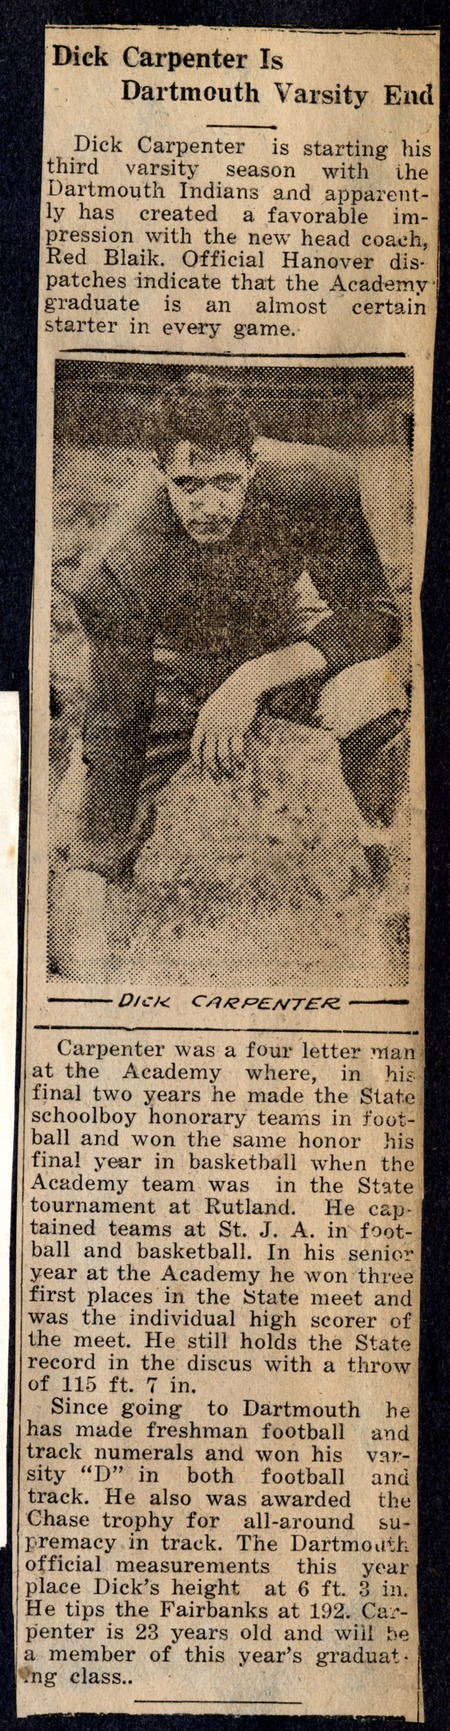 Newspaper clipping on Dick Carpenter